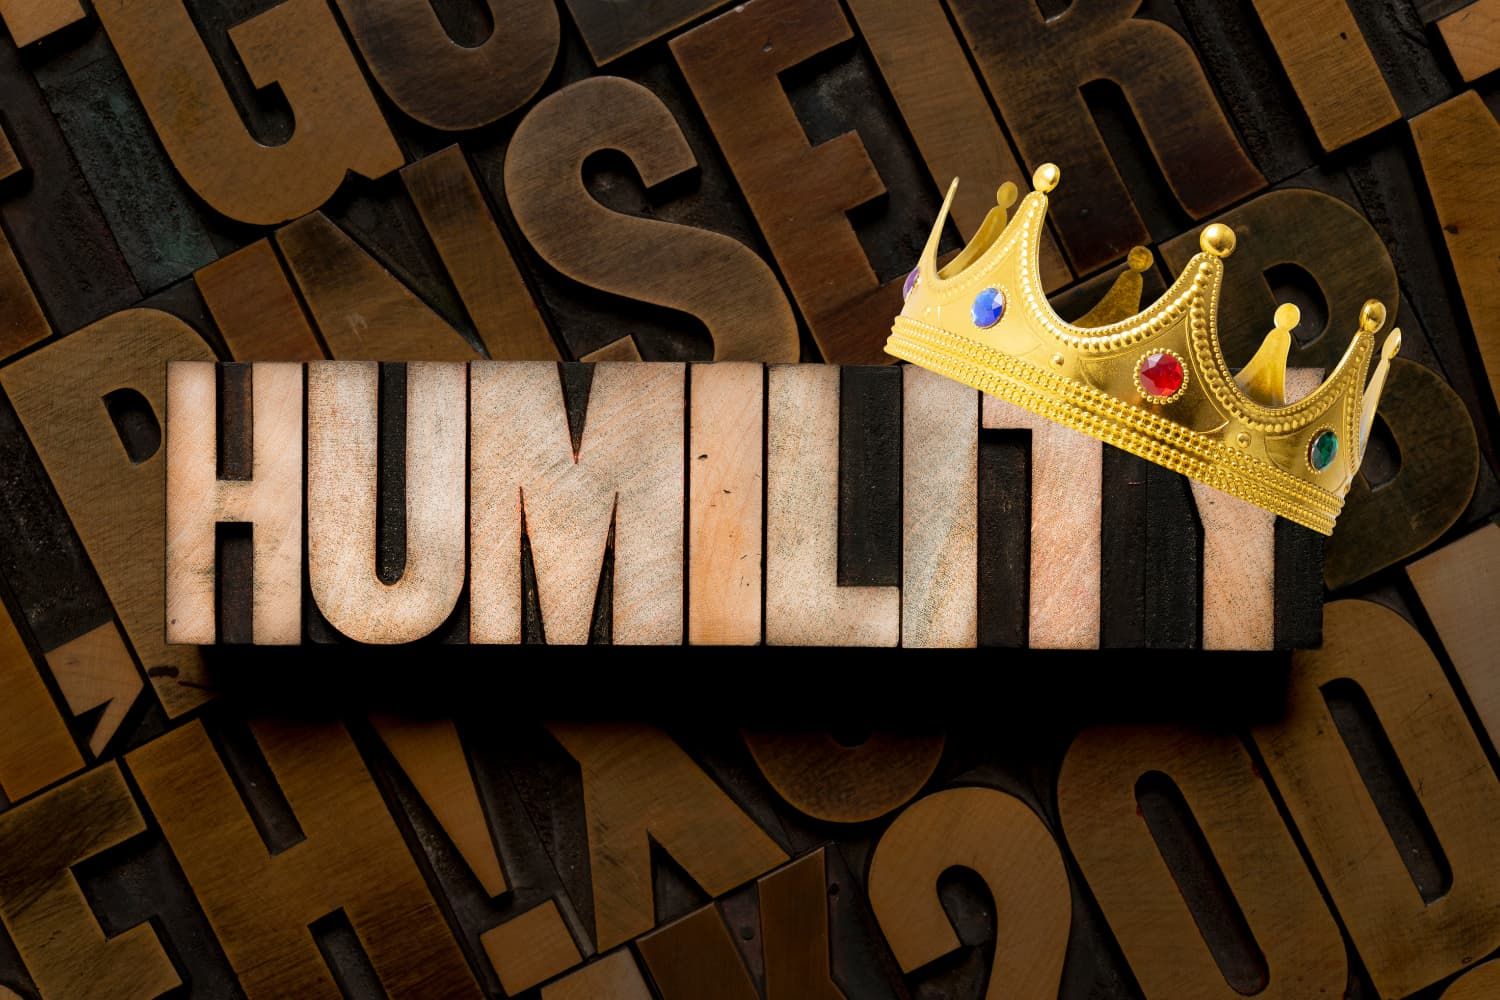 Prayer%20-%20NT%20Philippians%20-%20Crowns%20of%20humility-b83f3a0b Obedience